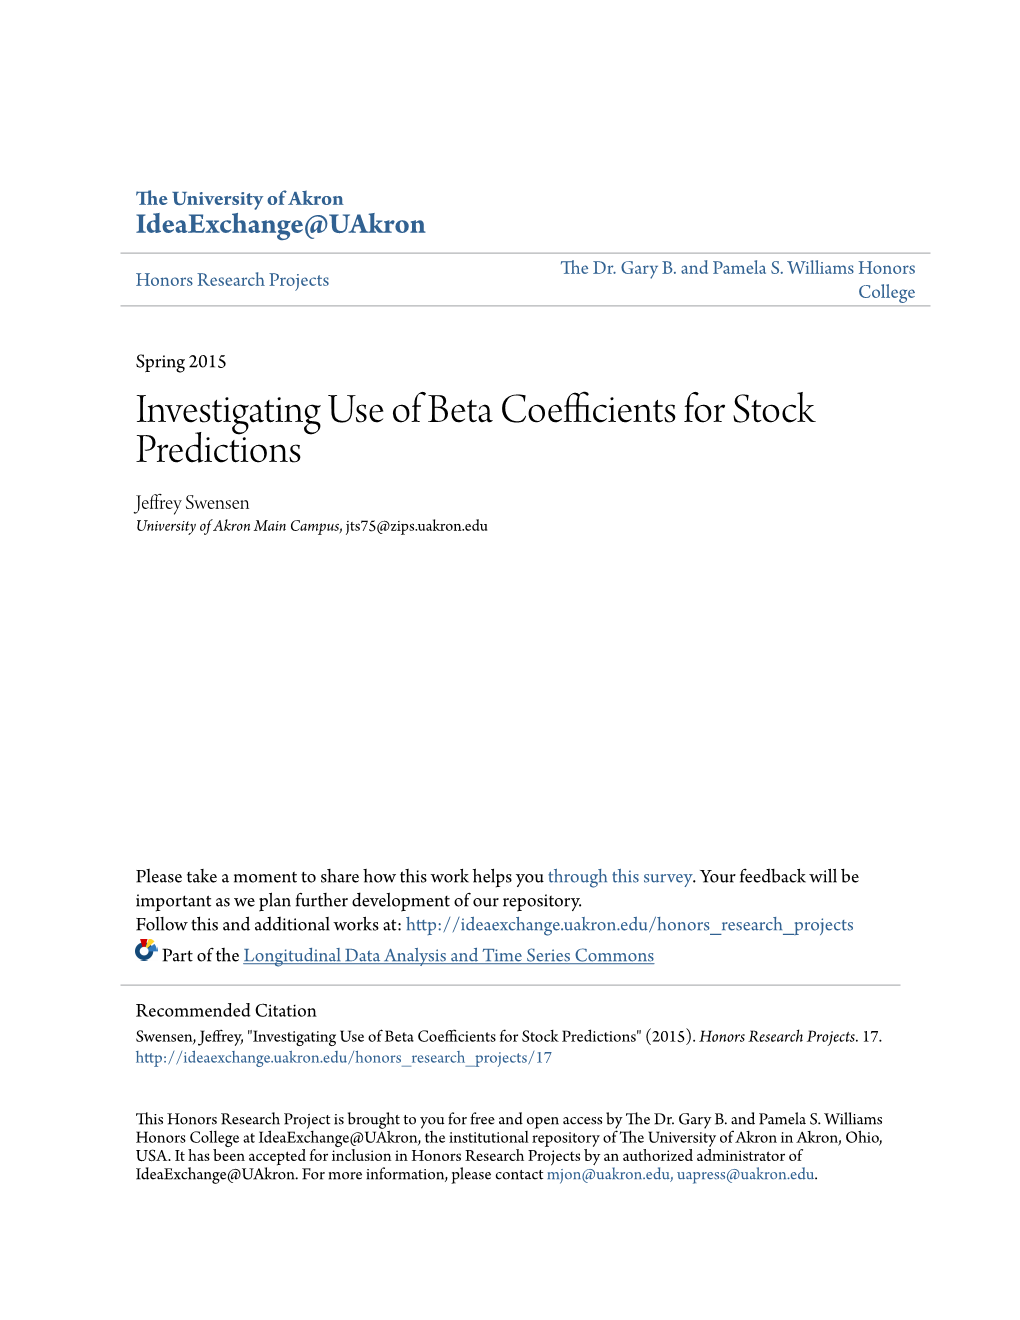 Investigating Use of Beta Coefficients for Stock Predictions Jeffrey Swensen University of Akron Main Campus, Jts75@Zips.Uakron.Edu